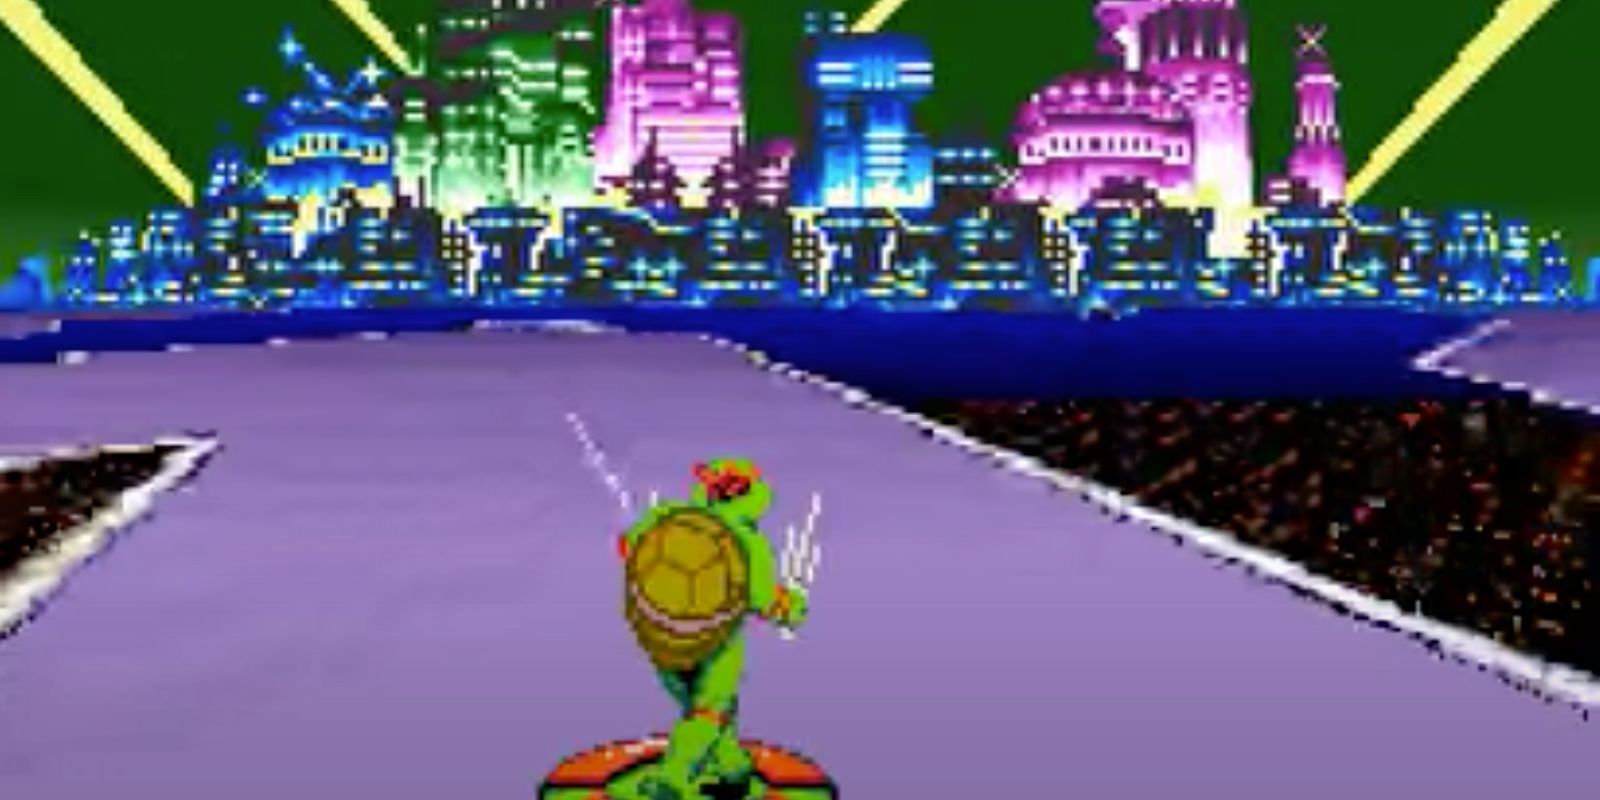 Turtles in Time was ported to the SNES and utilized the console's Mode 7 graphics capabilities to redesign levels